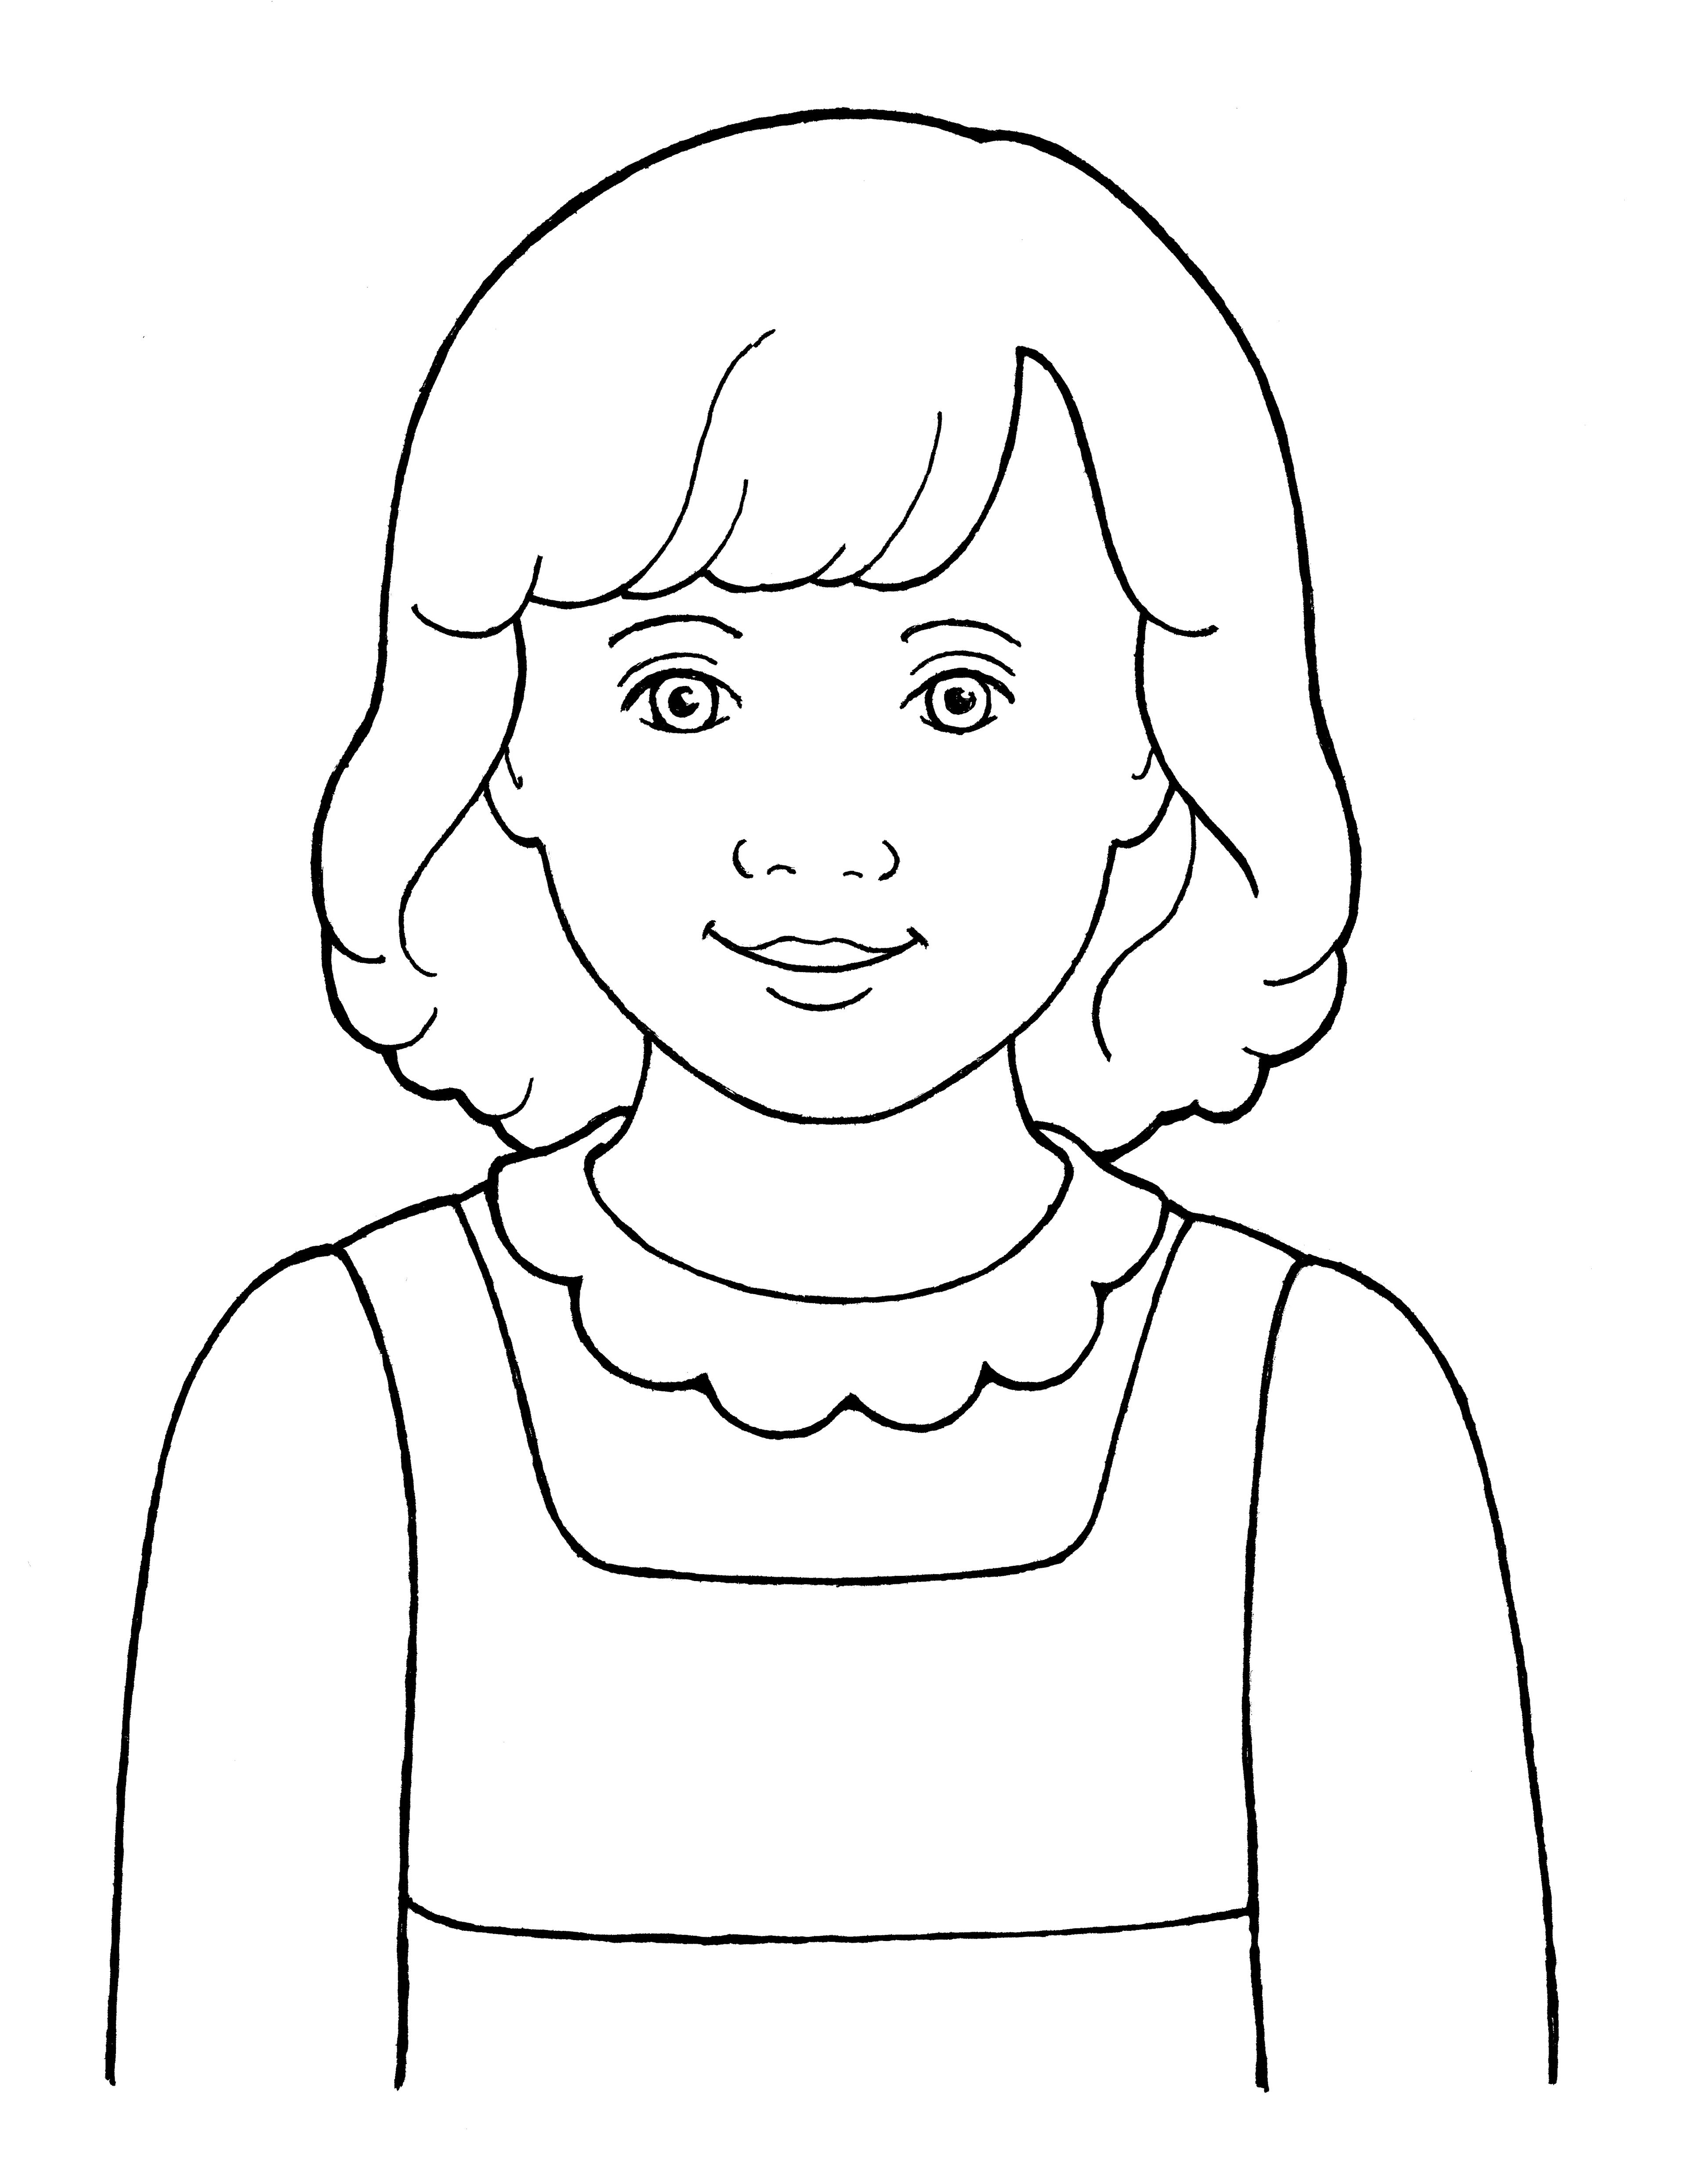 An illustration of a young Primary girl, from the nursery manual Behold Your Little Ones (2008), page 11.